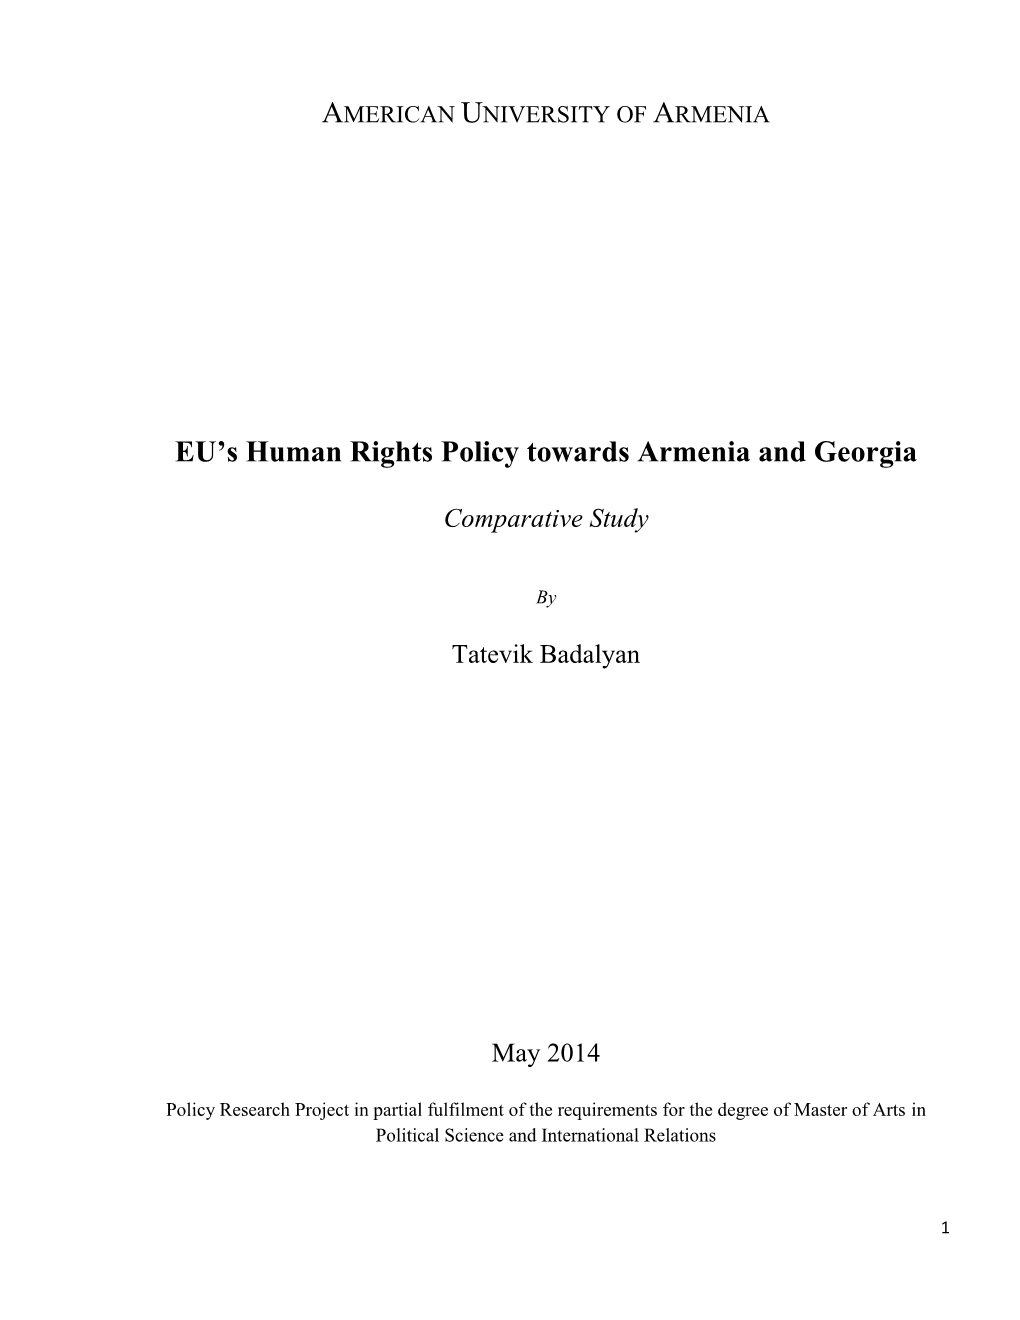 EU's Human Rights Policy Towards Armenia and Georgia, the Research Questions of the Study Are